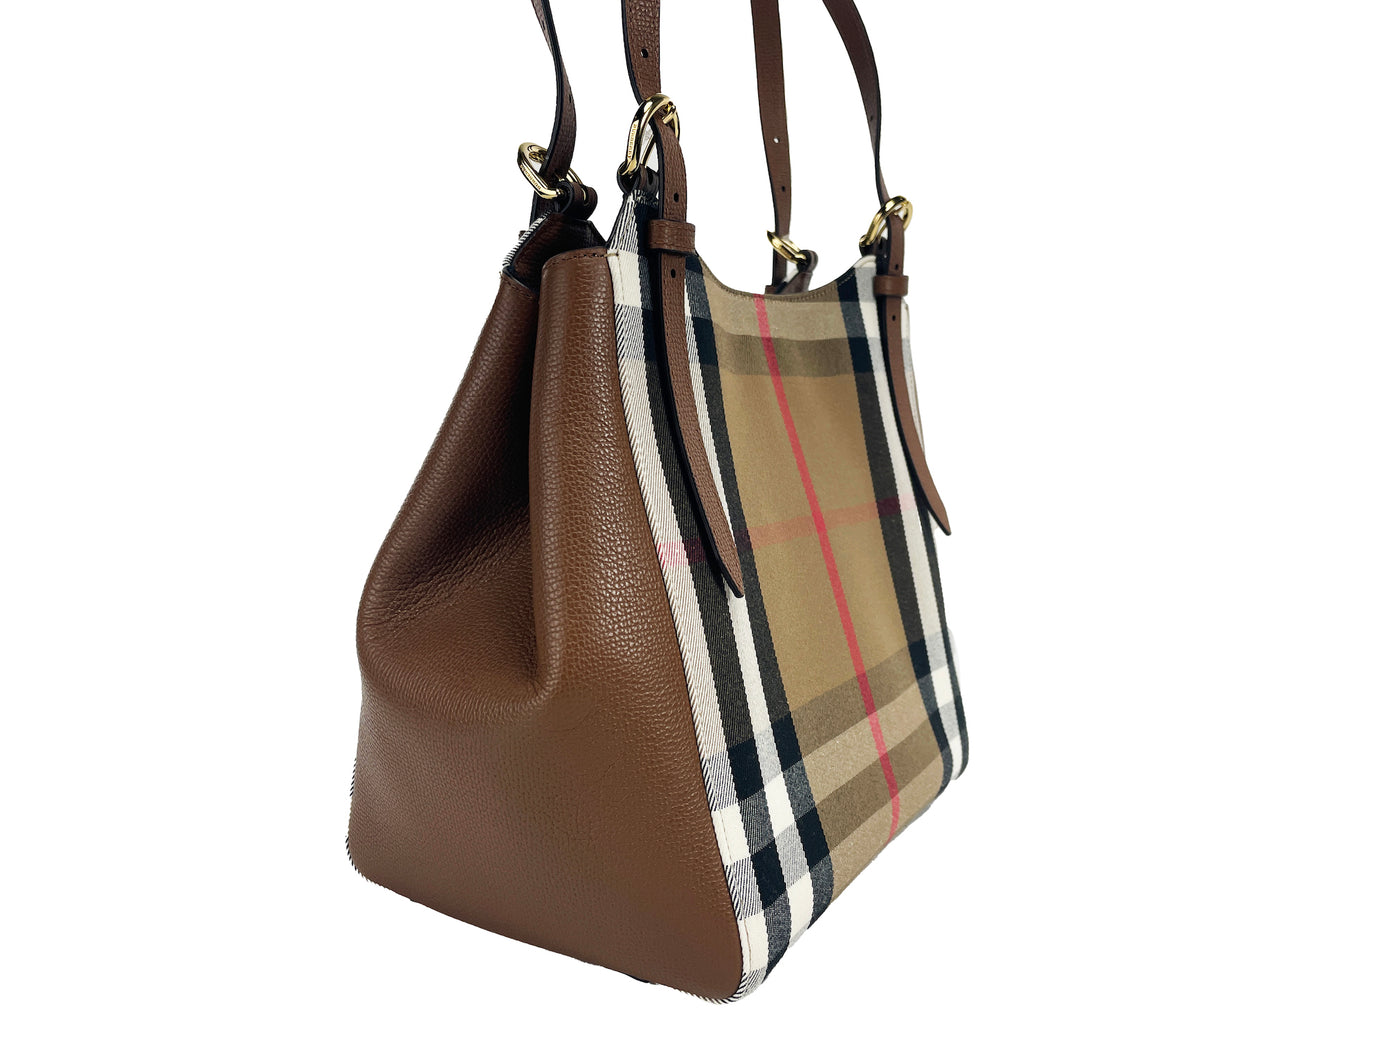 Burberry Small Canterby Tan Leather Check Canvas Tote Bag Purse